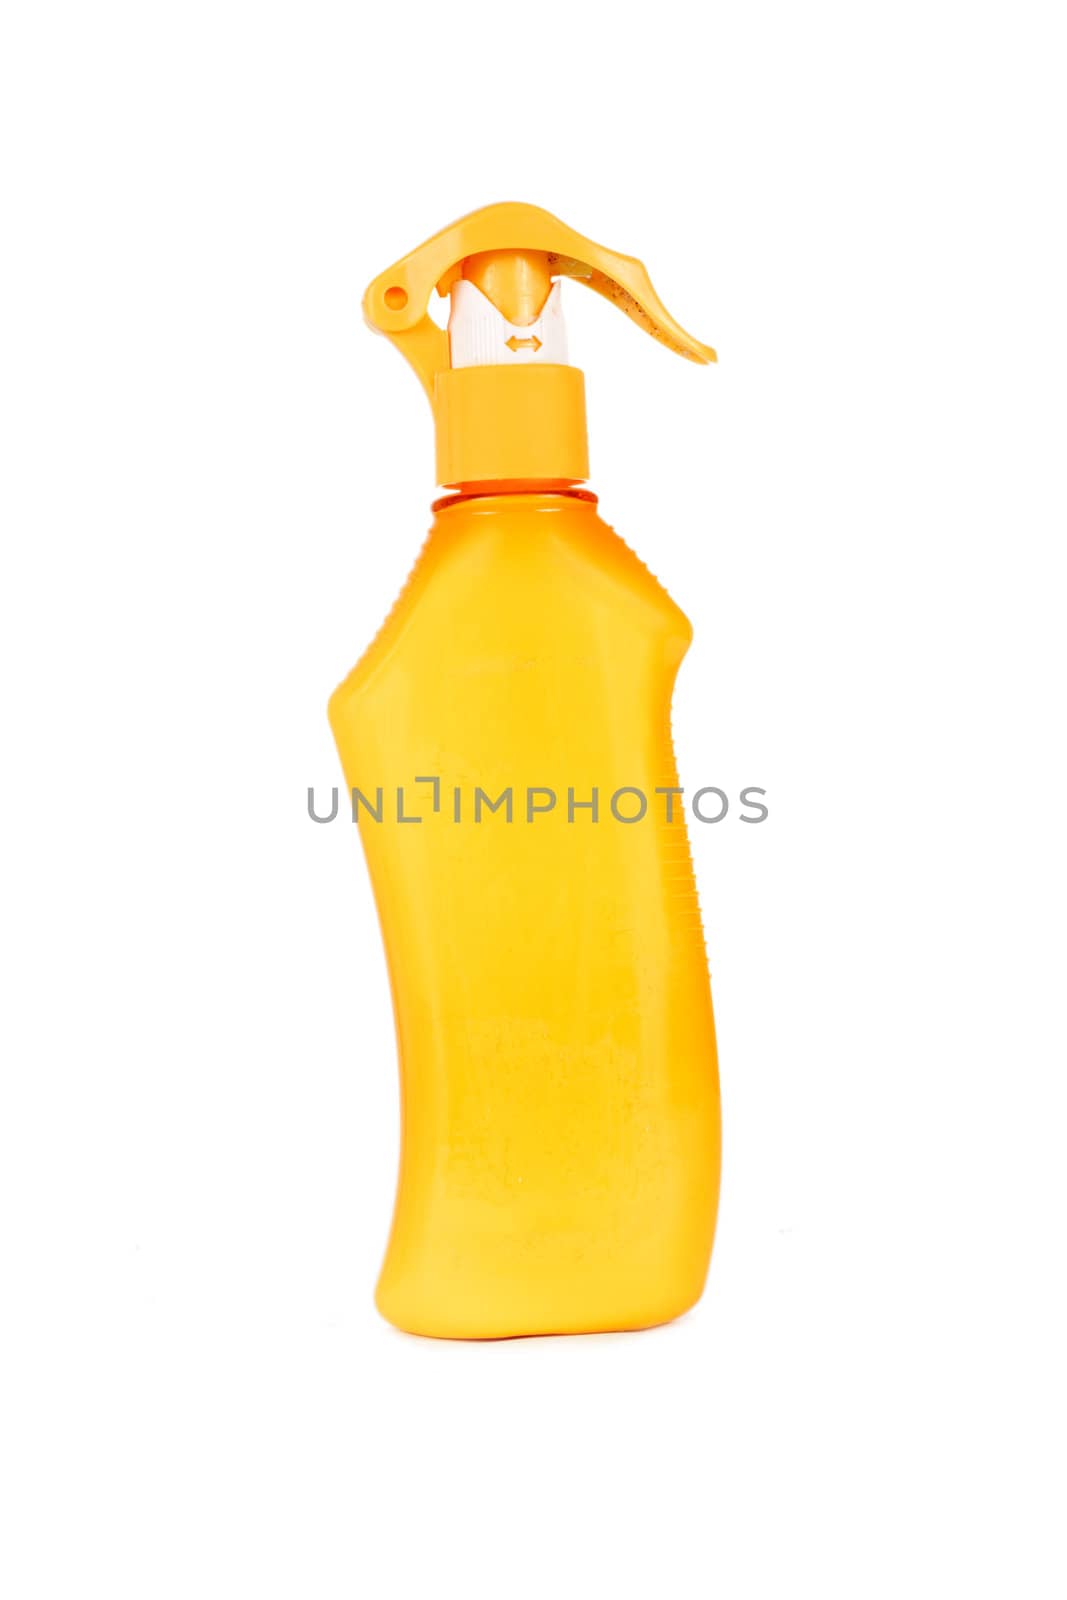 Plastic bottle for lotion, soap, shampoo, sunscreen etc. Isolated on white..
